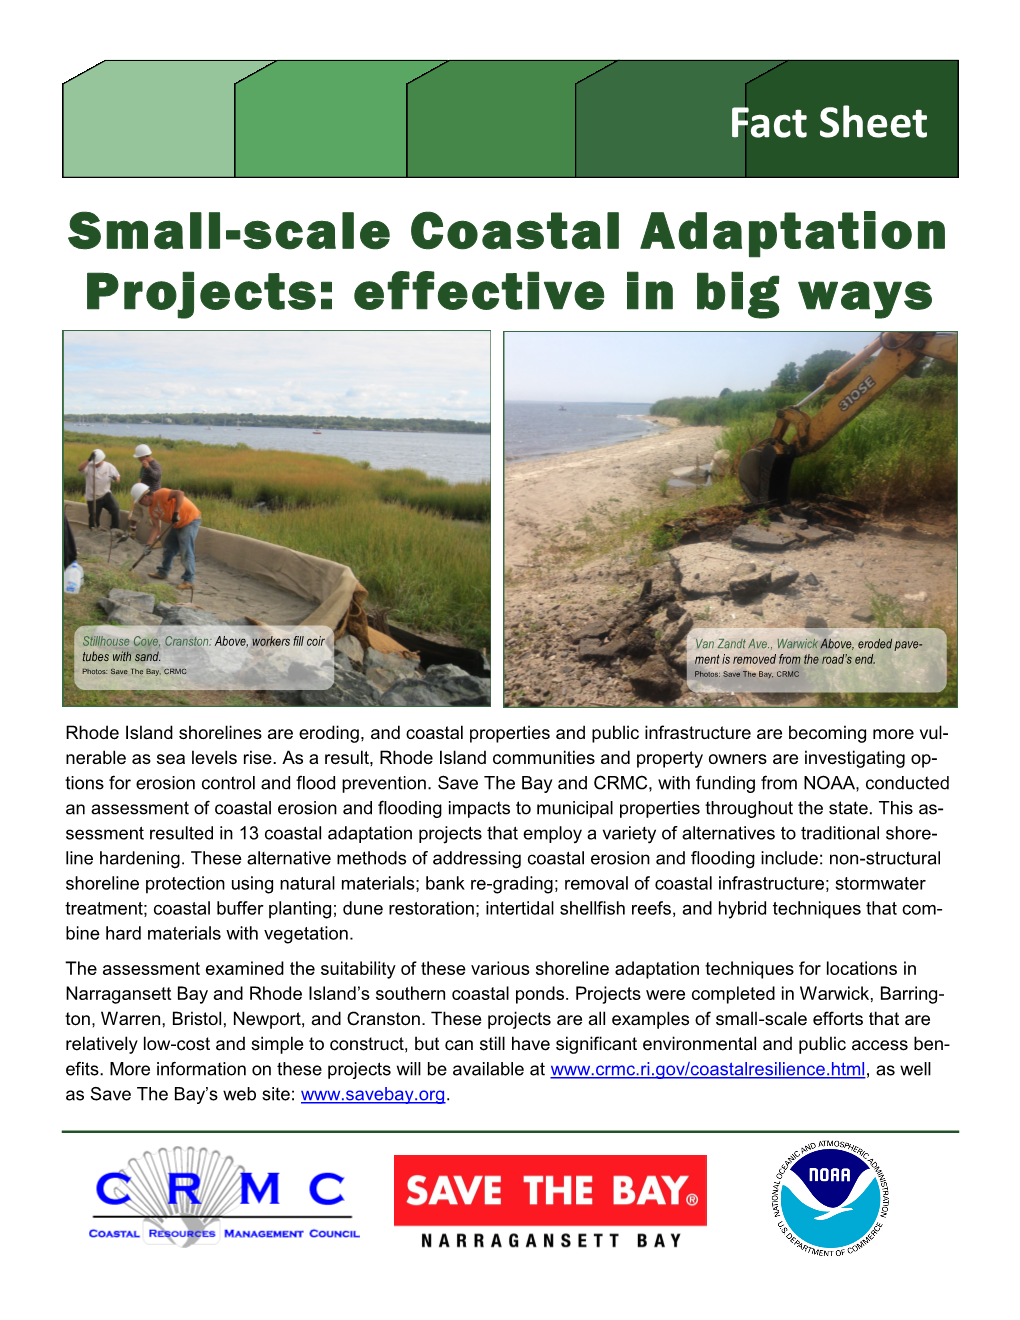 Small-Scale Coastal Adaptation Projects: Effective in Big Ways